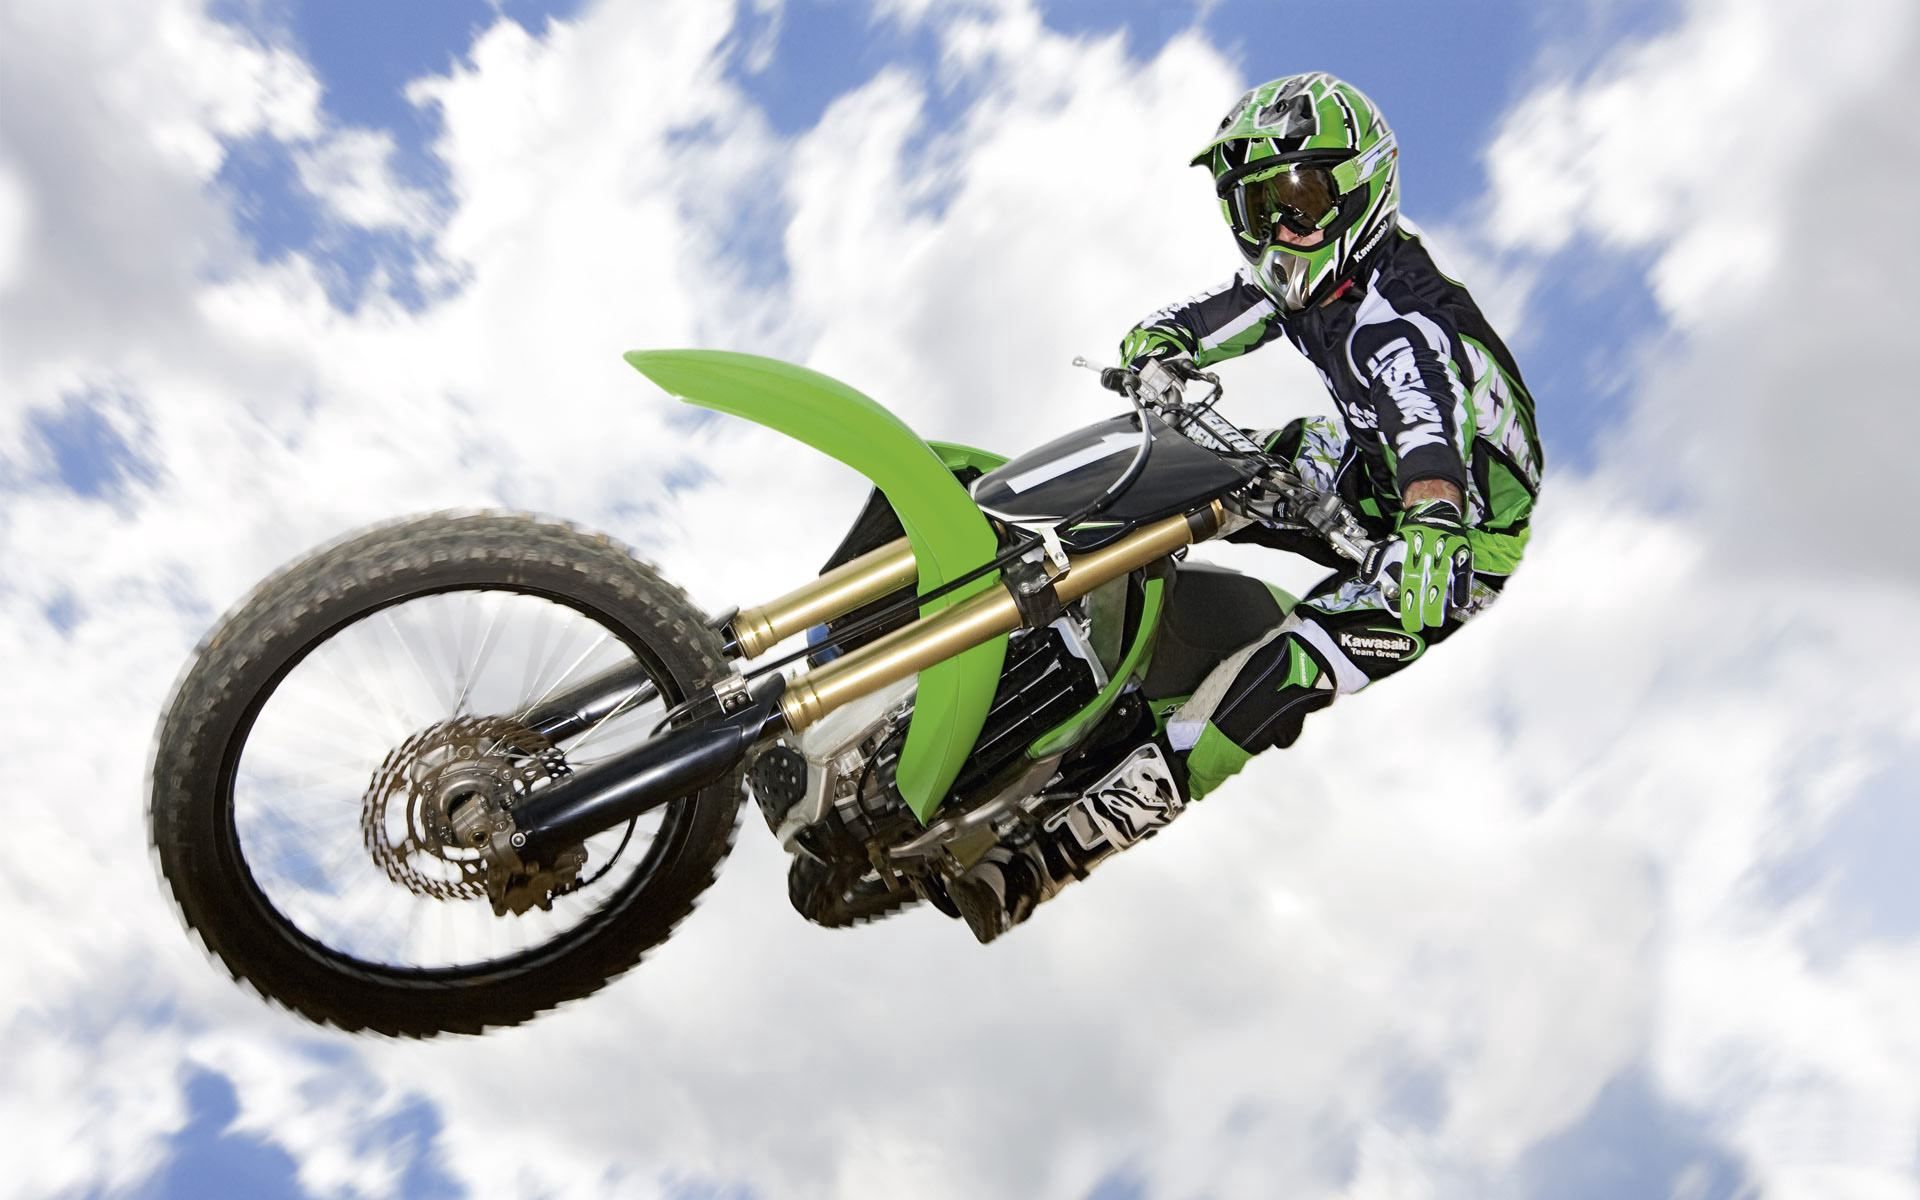 wallpapers sky, clouds, motorcycles, motorcycle, bounce, jump, extreme, trick